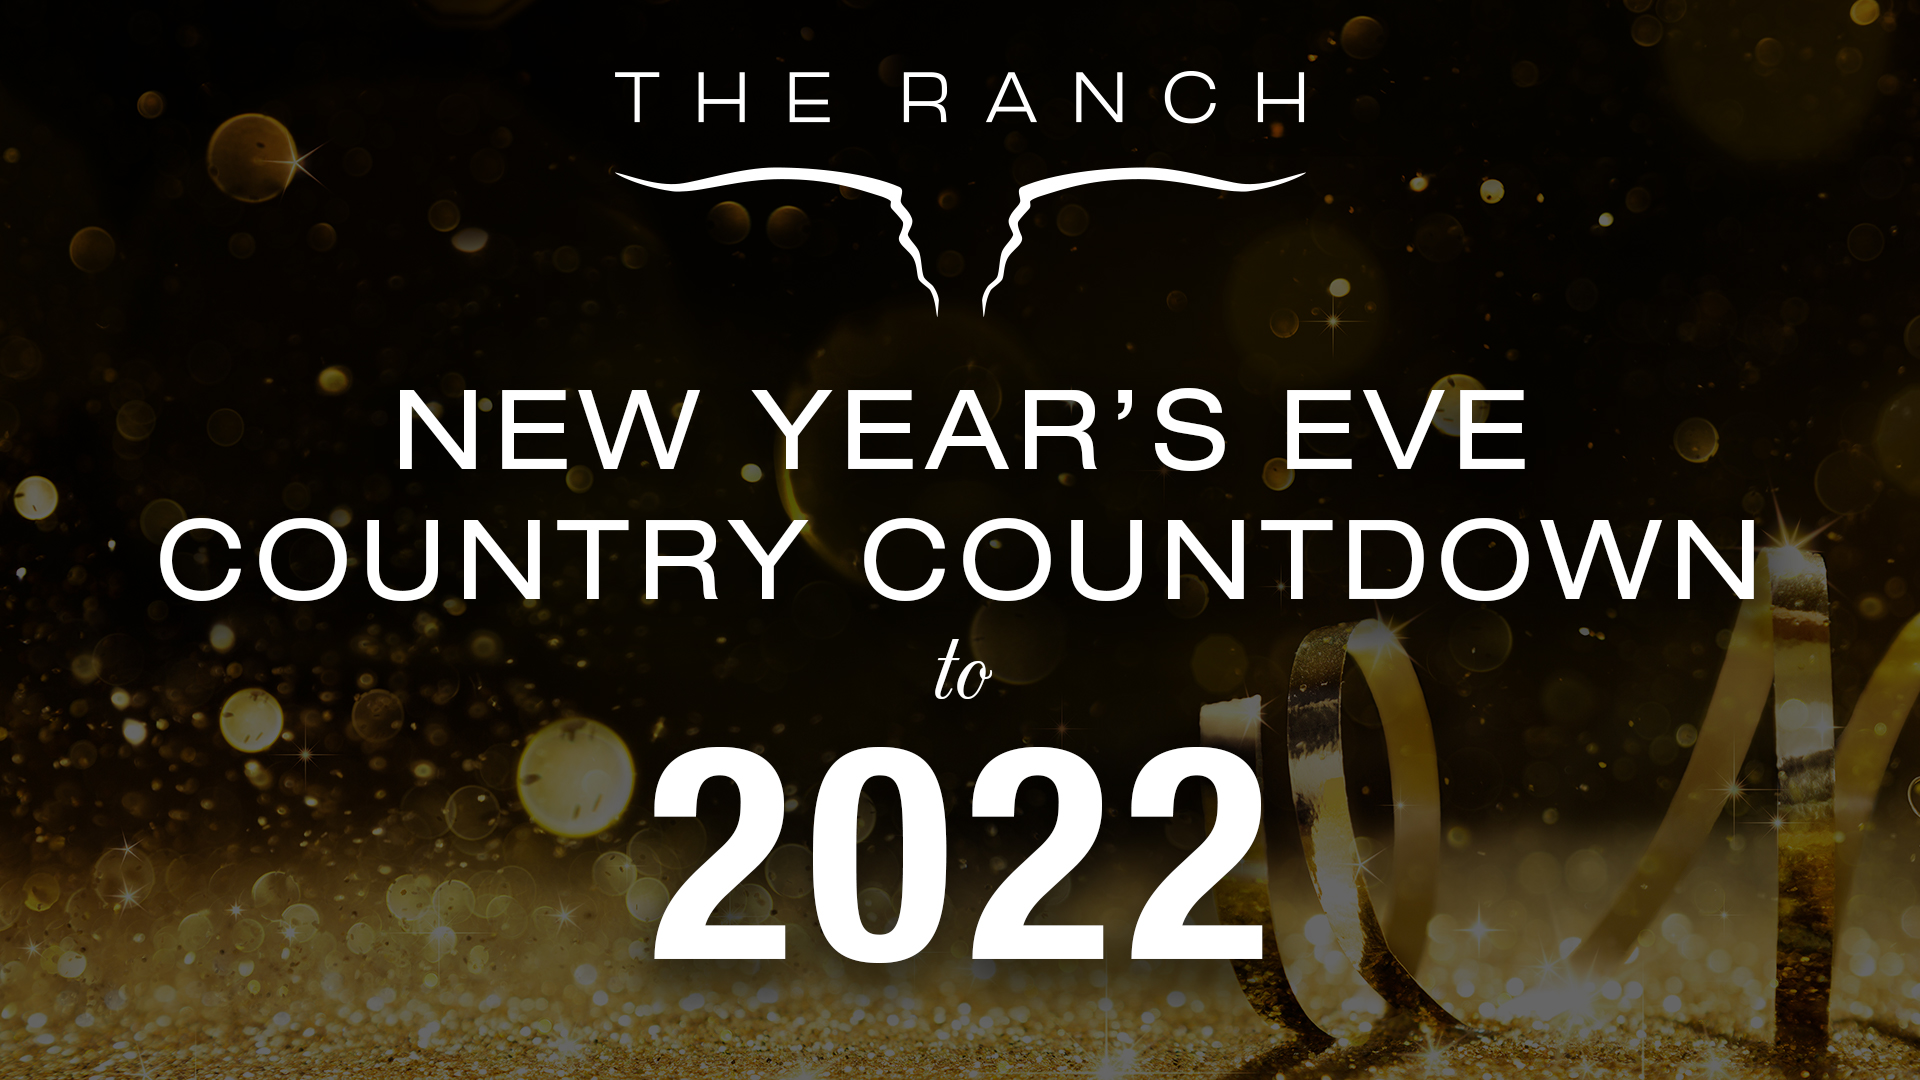 THE RANCH Saloon New Year's Eve 2021 Concert Event with the Country Club Band December 31st, 2021